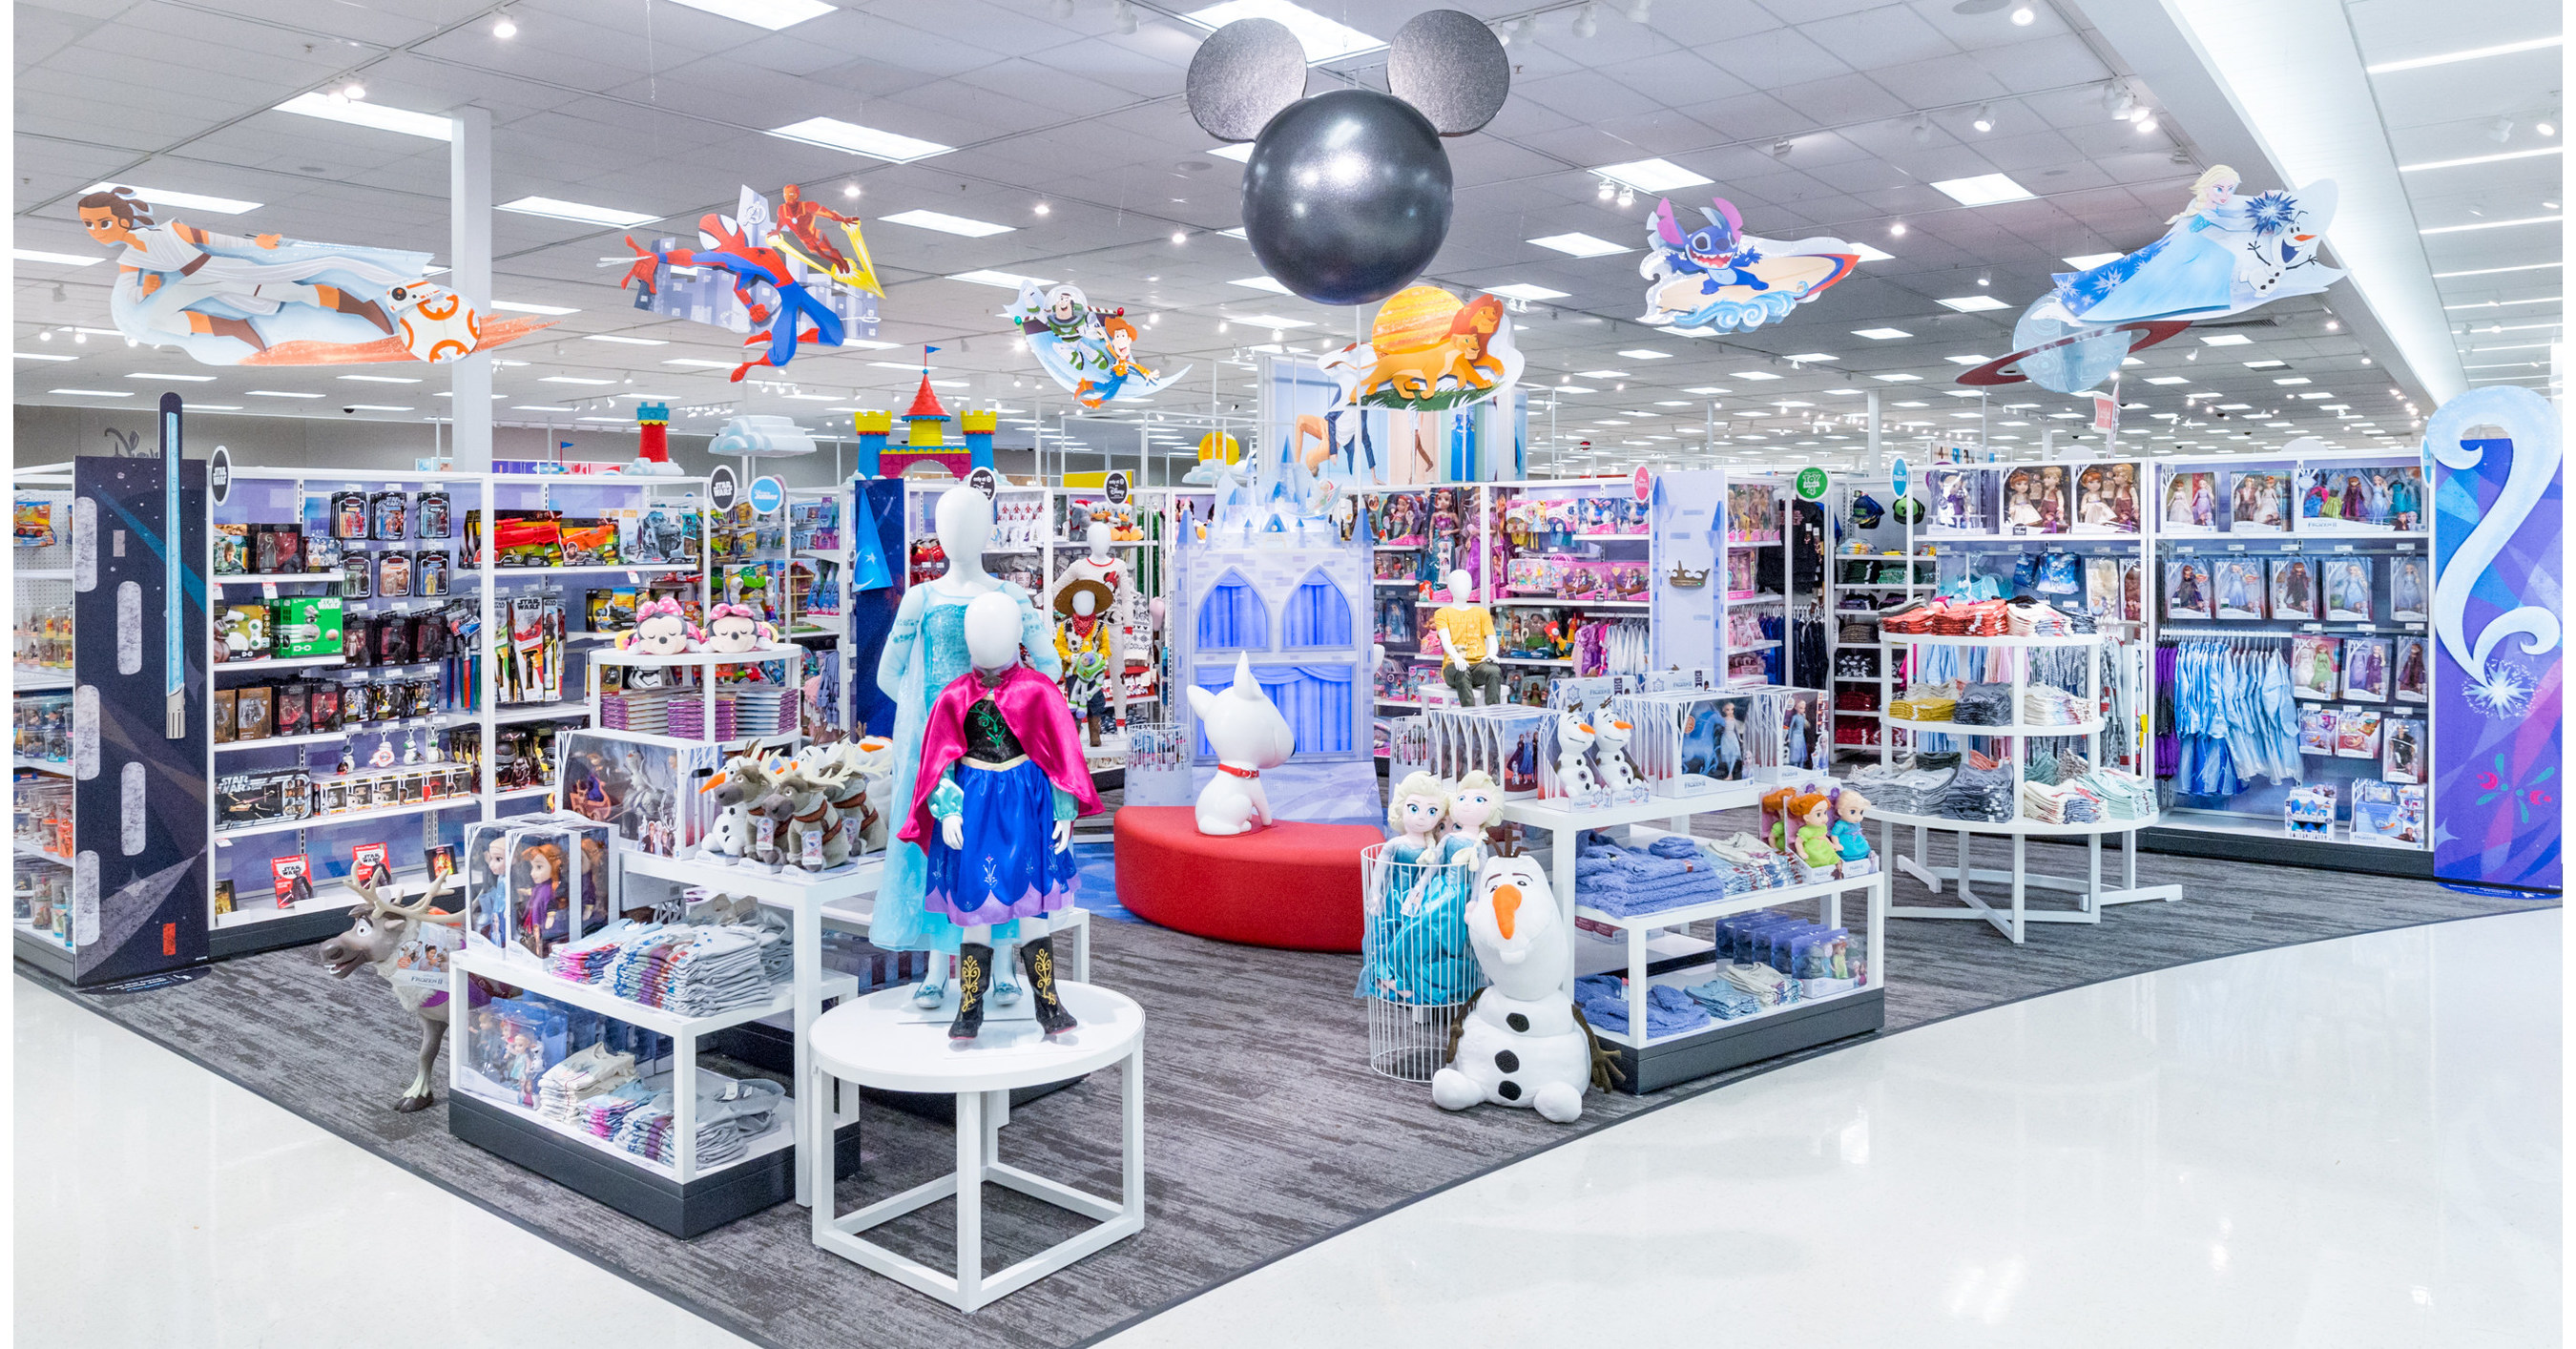 Disney Store at Target Launches Online and in 25 Target